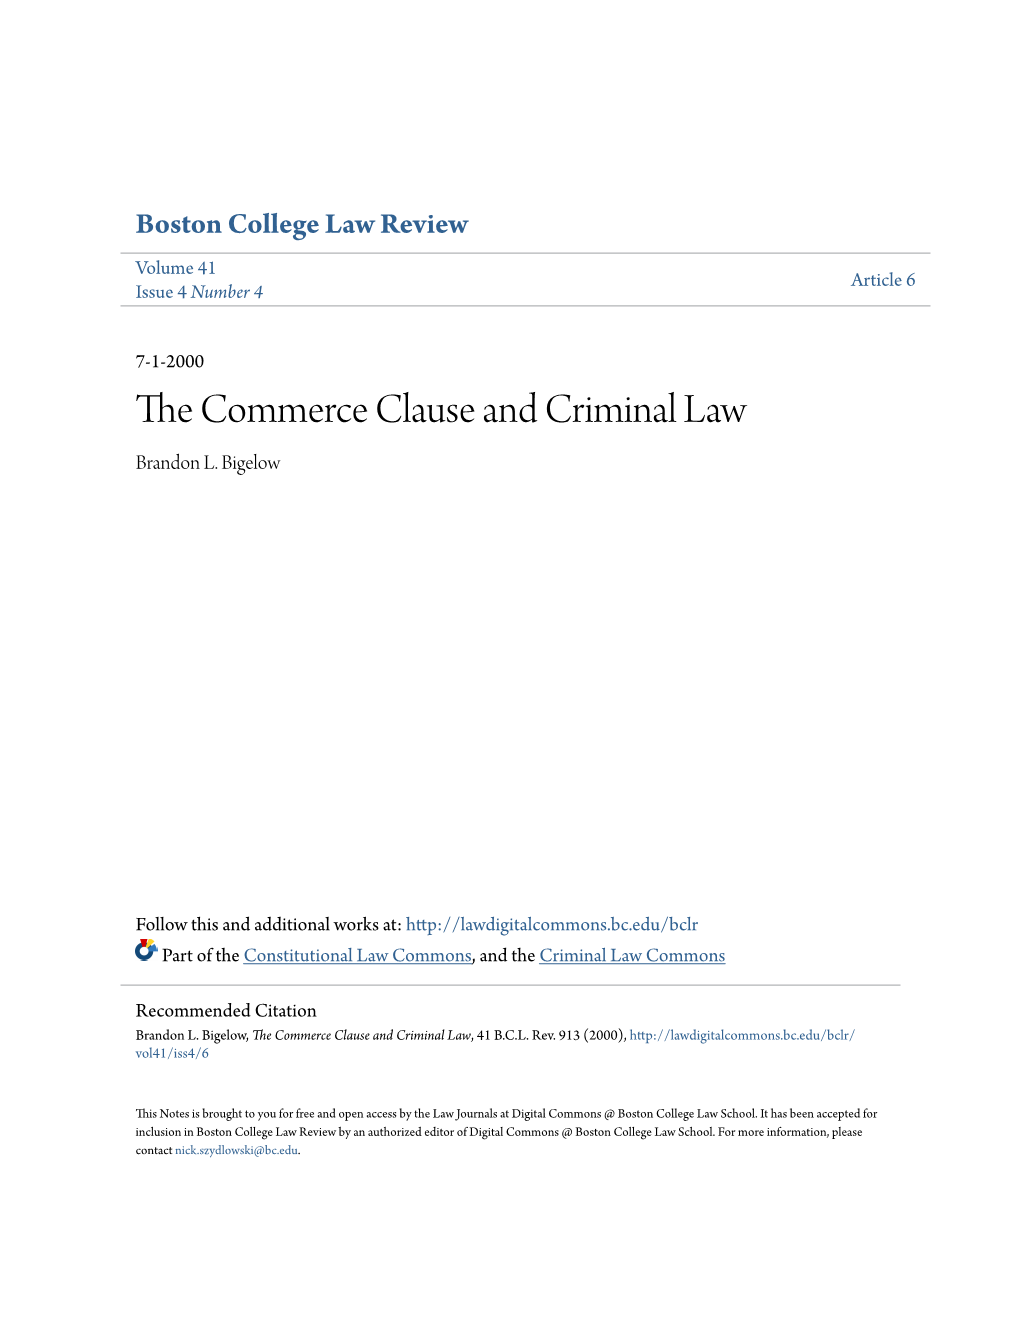 The Commerce Clause and Criminal Law, 41 B.C.L